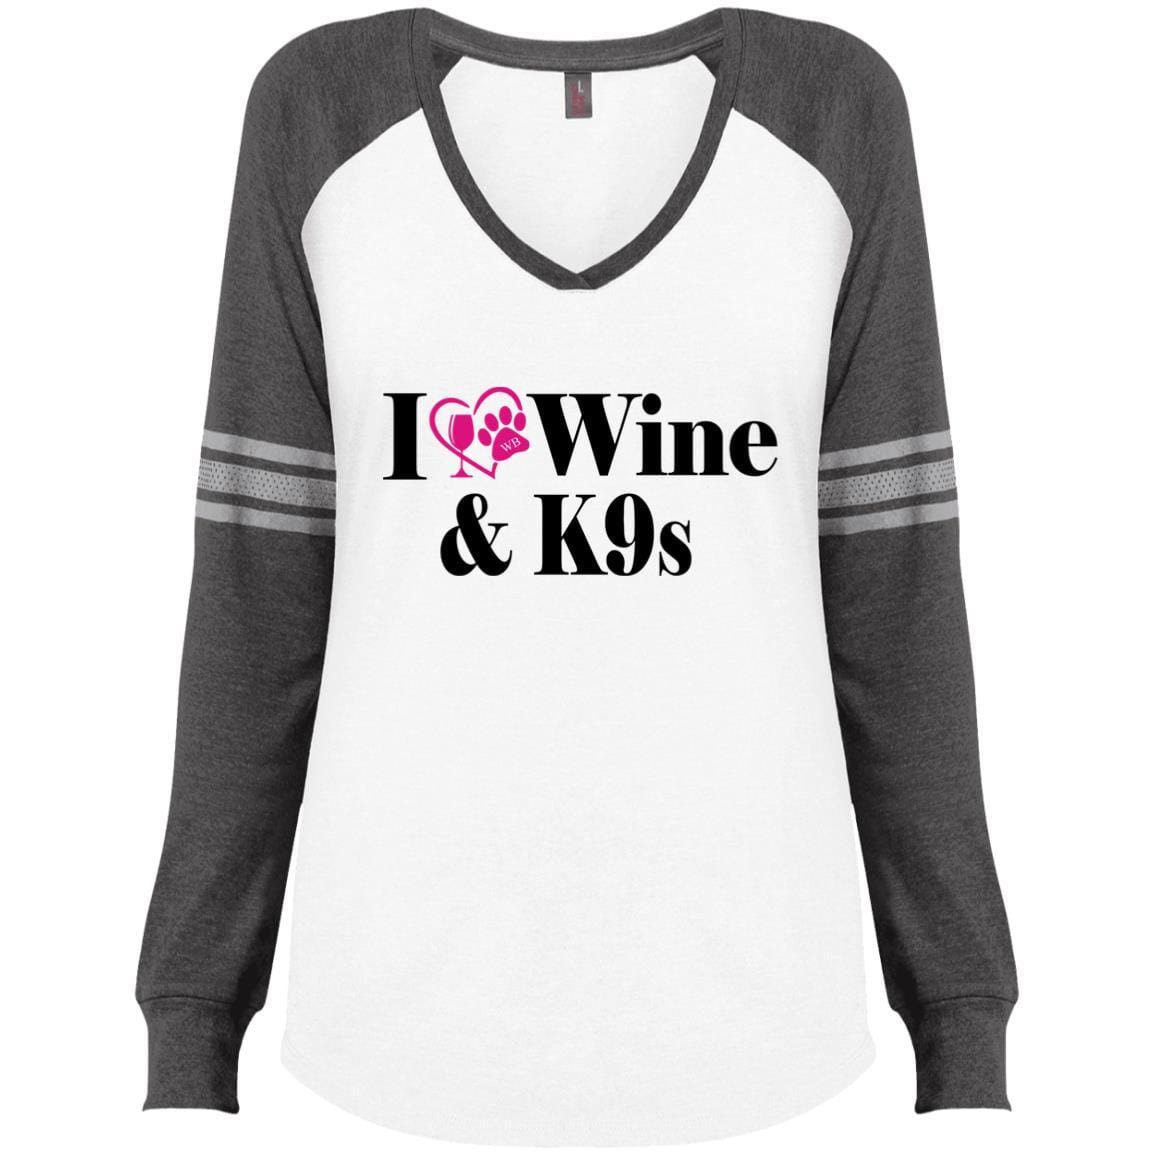 T-Shirts White/Heathered Charcoal / X-Small WineyBitches.Co "I Love Wine and K9s" Ladies' Game LS V-Neck T-Shirt WineyBitchesCo